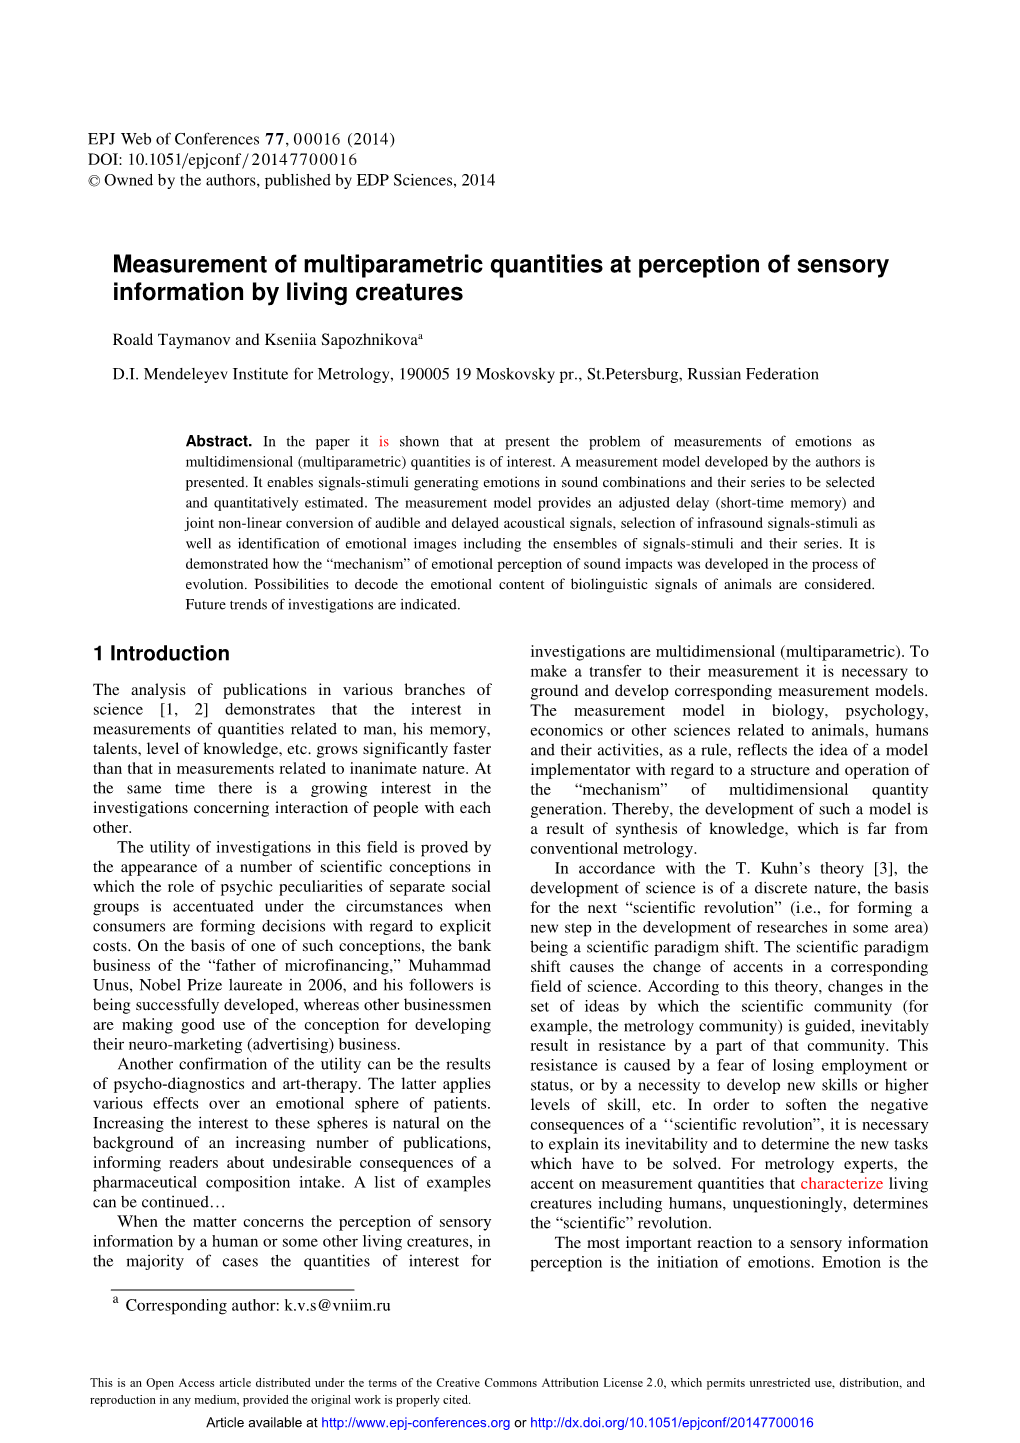 Measurement of Multiparametric Quantities at Perception of Sensory Information by Living Creatures